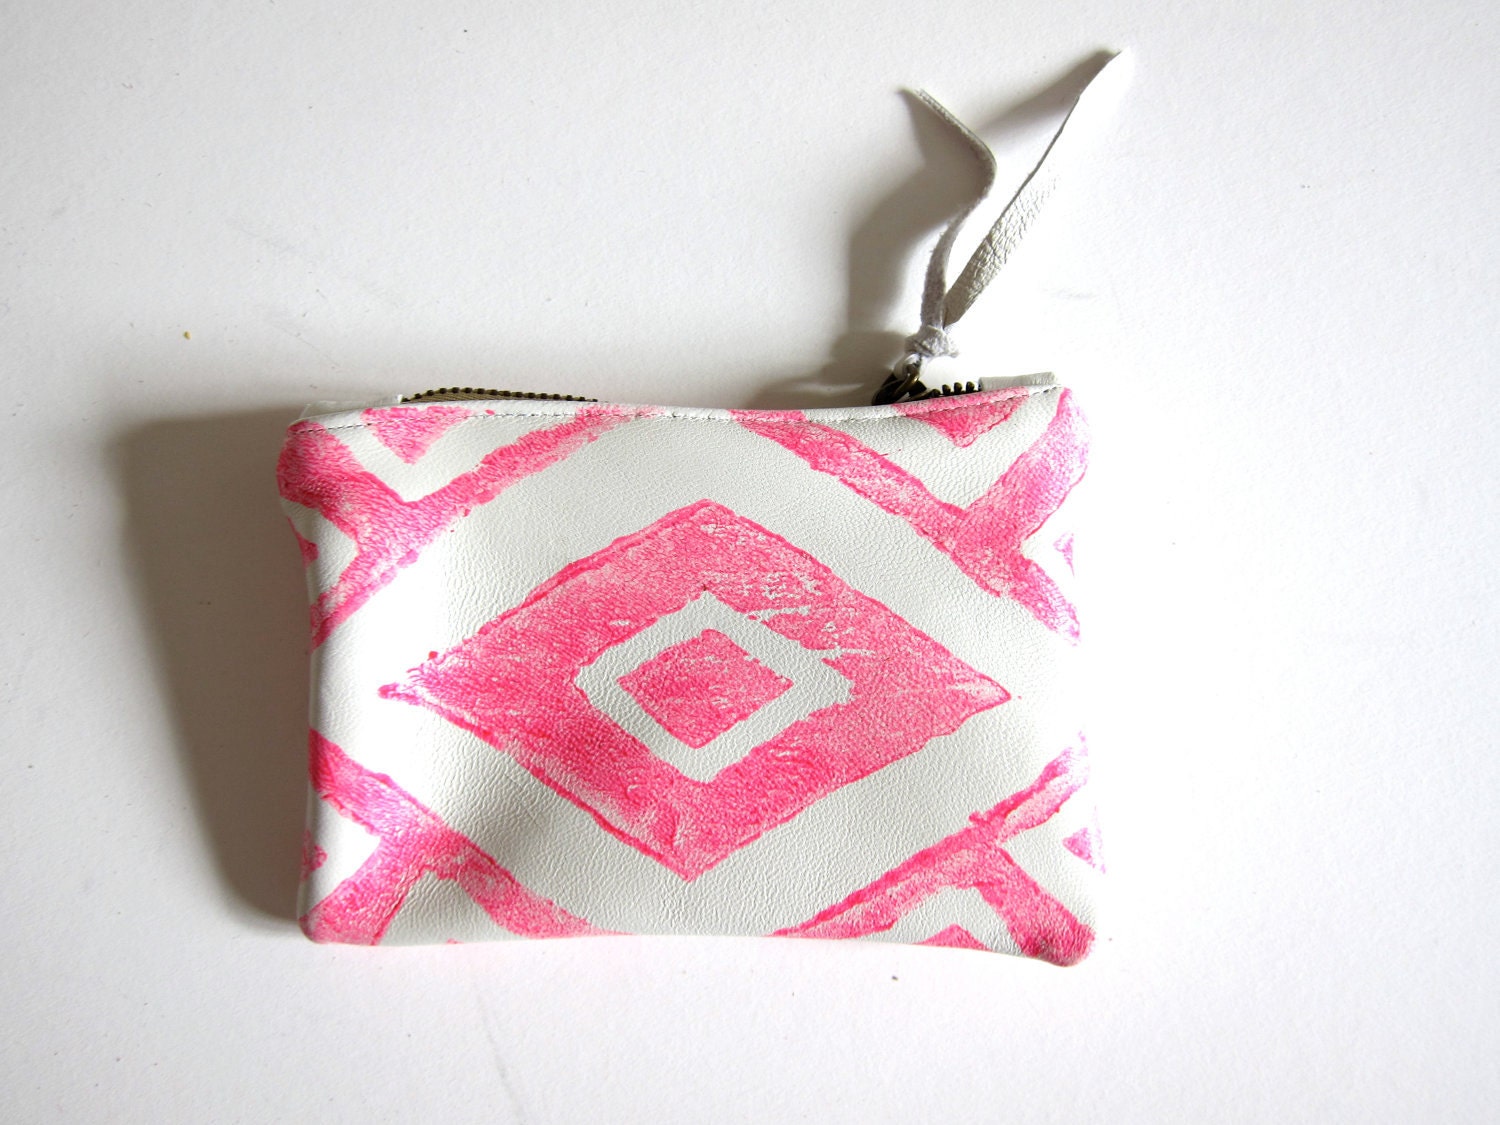 Extra-small hot pink and white hand-printed leather diamonds clutch / wallet